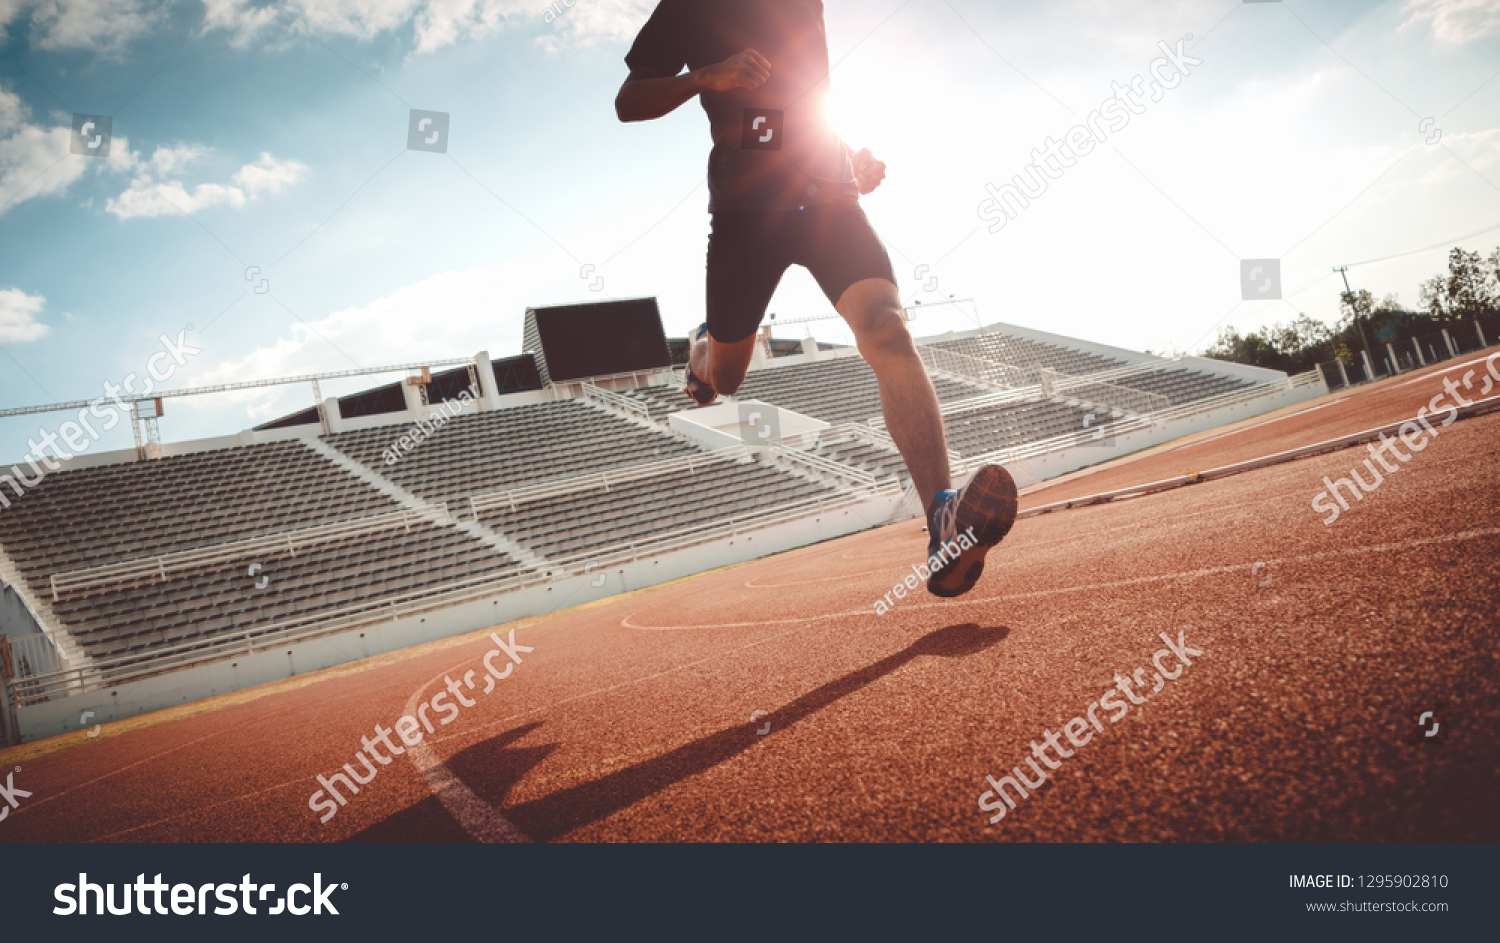 Sport Backgrounds, Male runner ready for sports exercise, Athlete running on athletic track. #1295902810